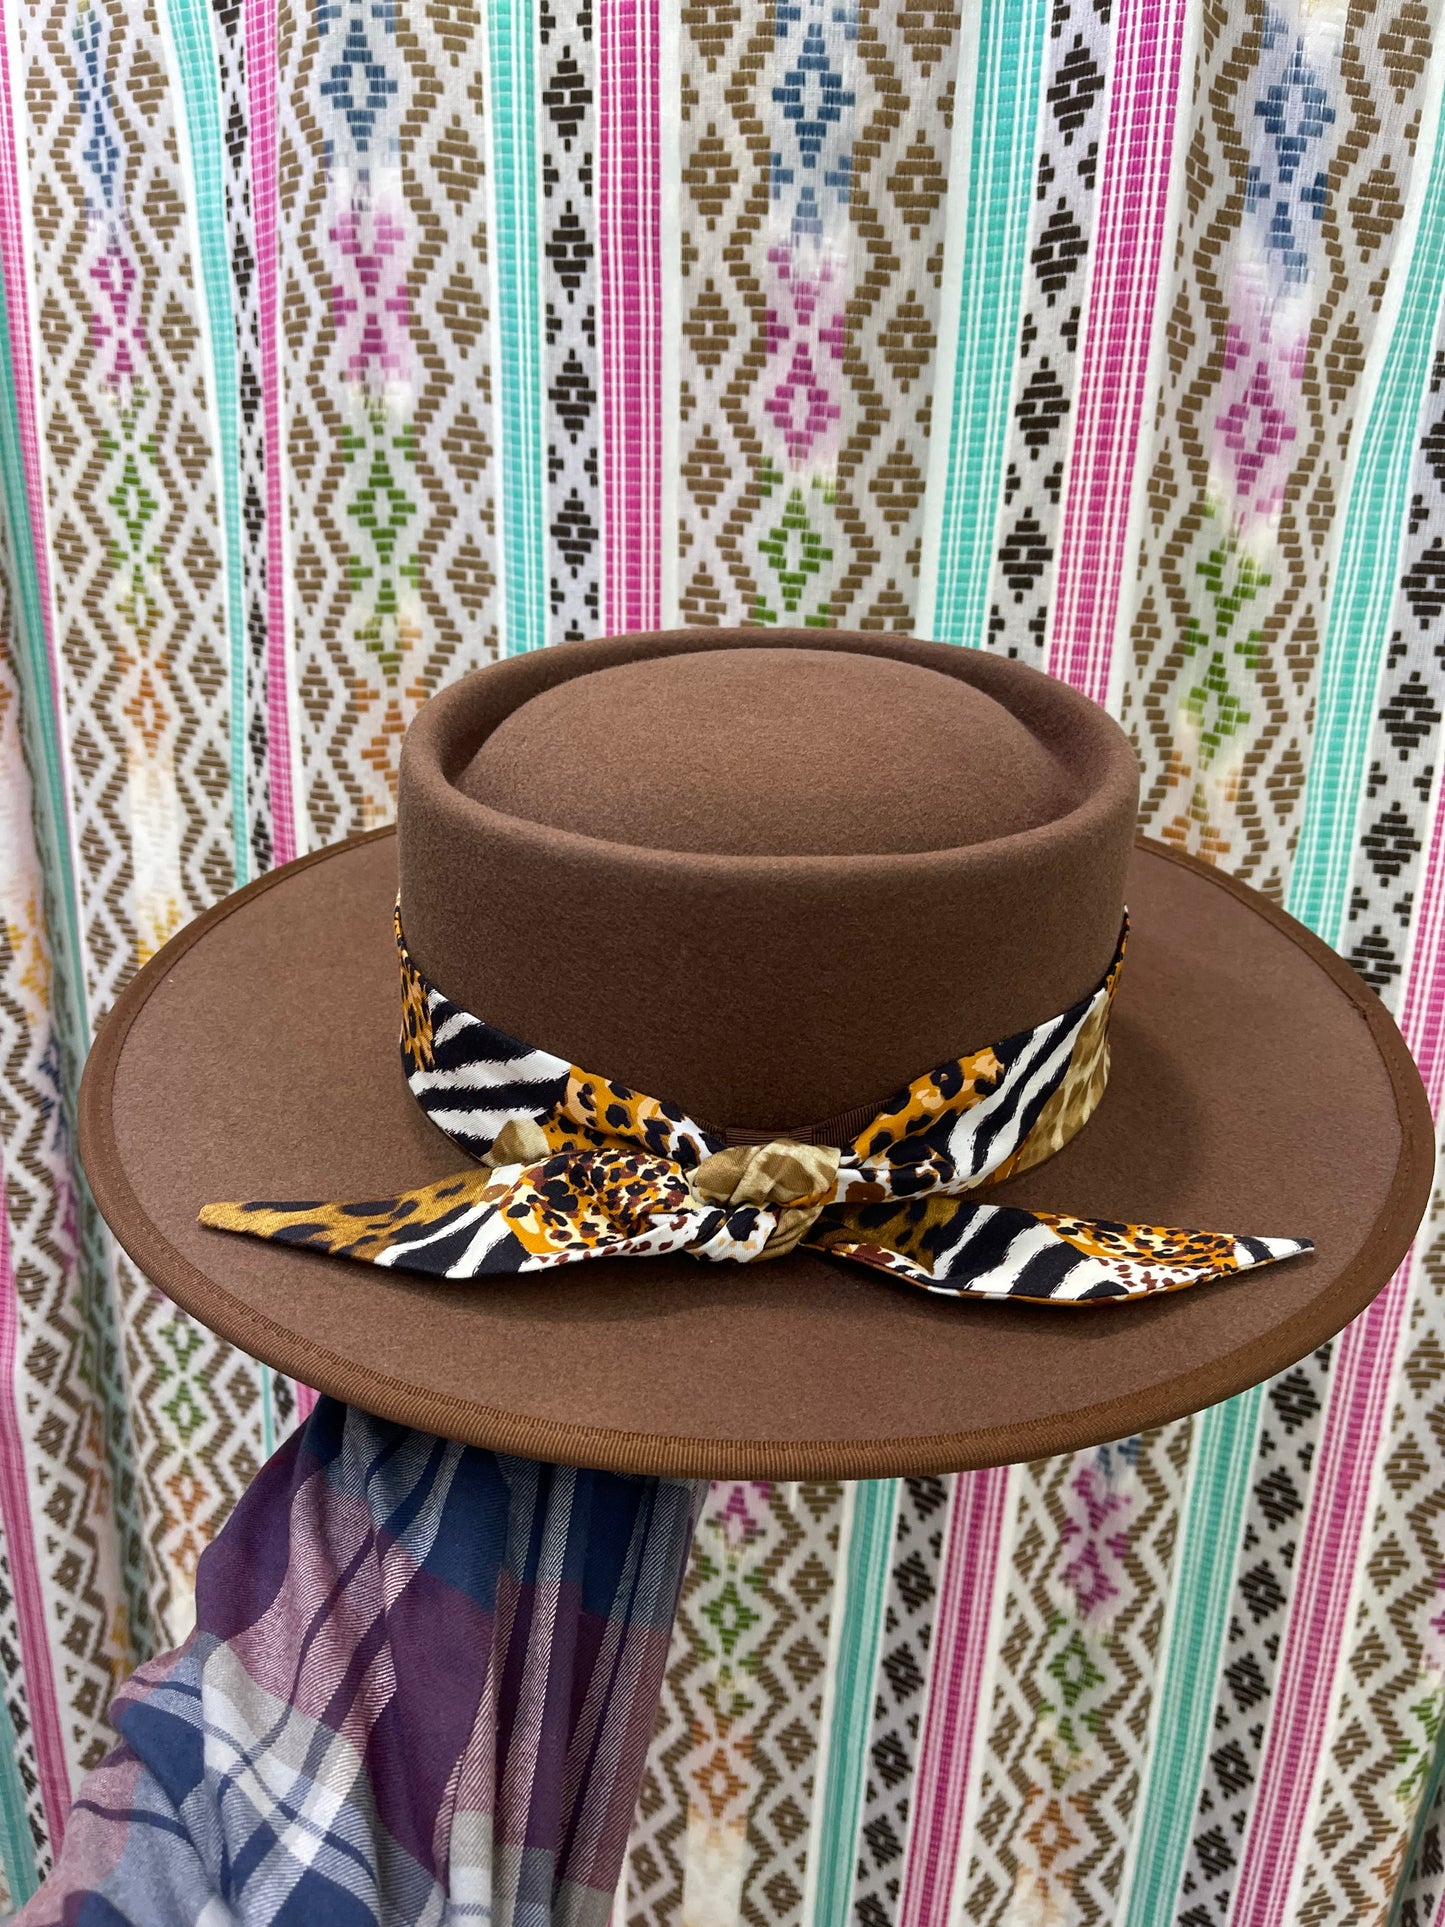 Sweet Animal Print Hat Bands [All Styles]